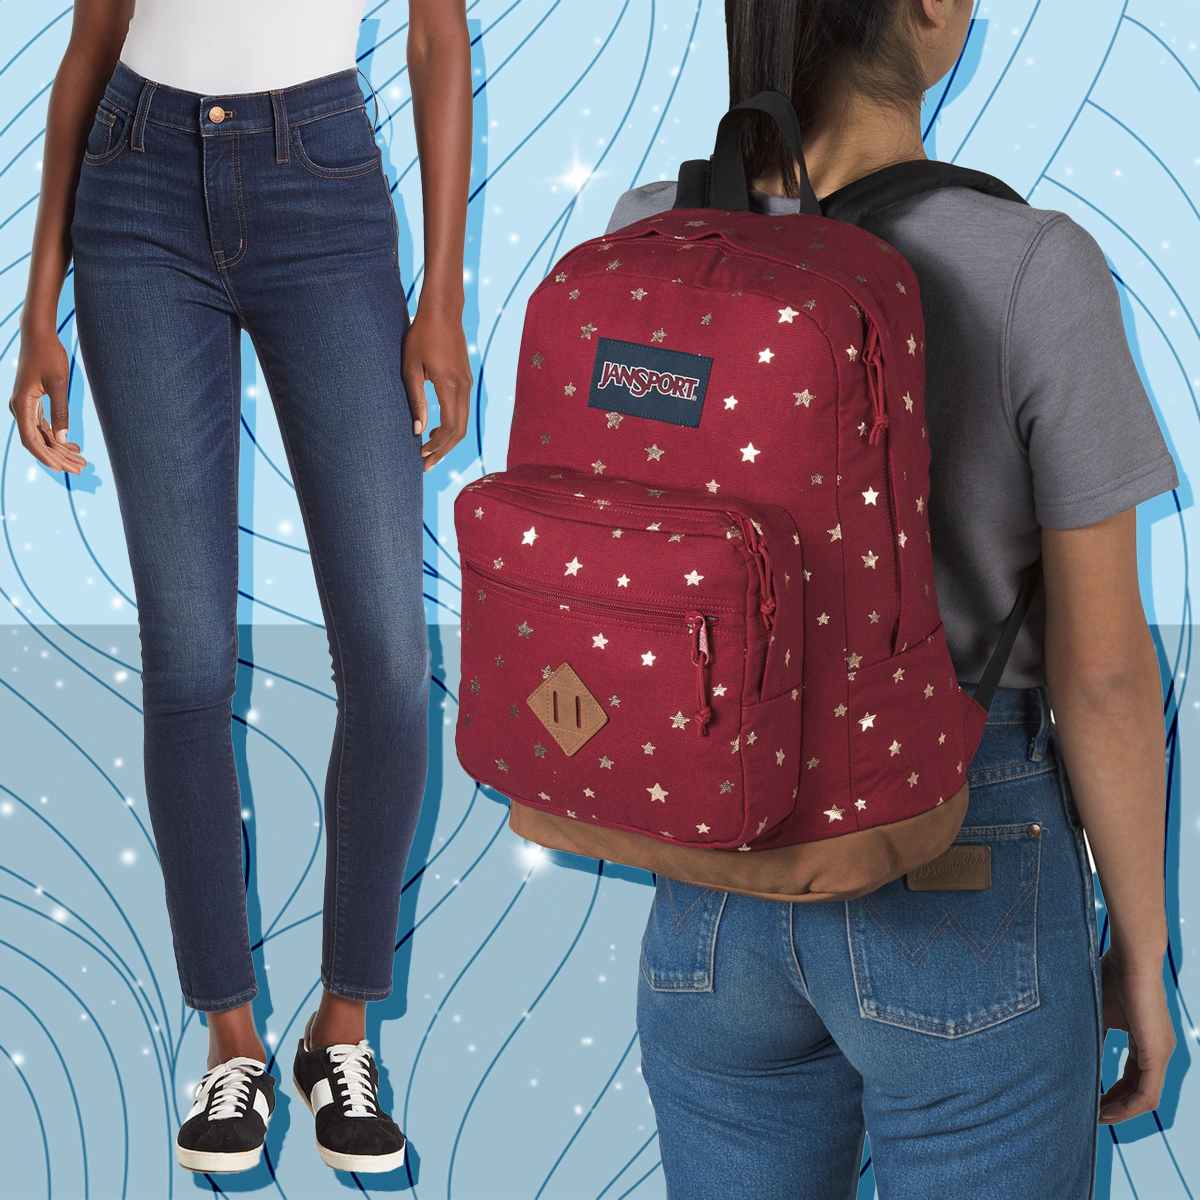 Nordstrom Rack&#39;s Back to School Flash Sale Has Deals up to 85% Off! - E! Online